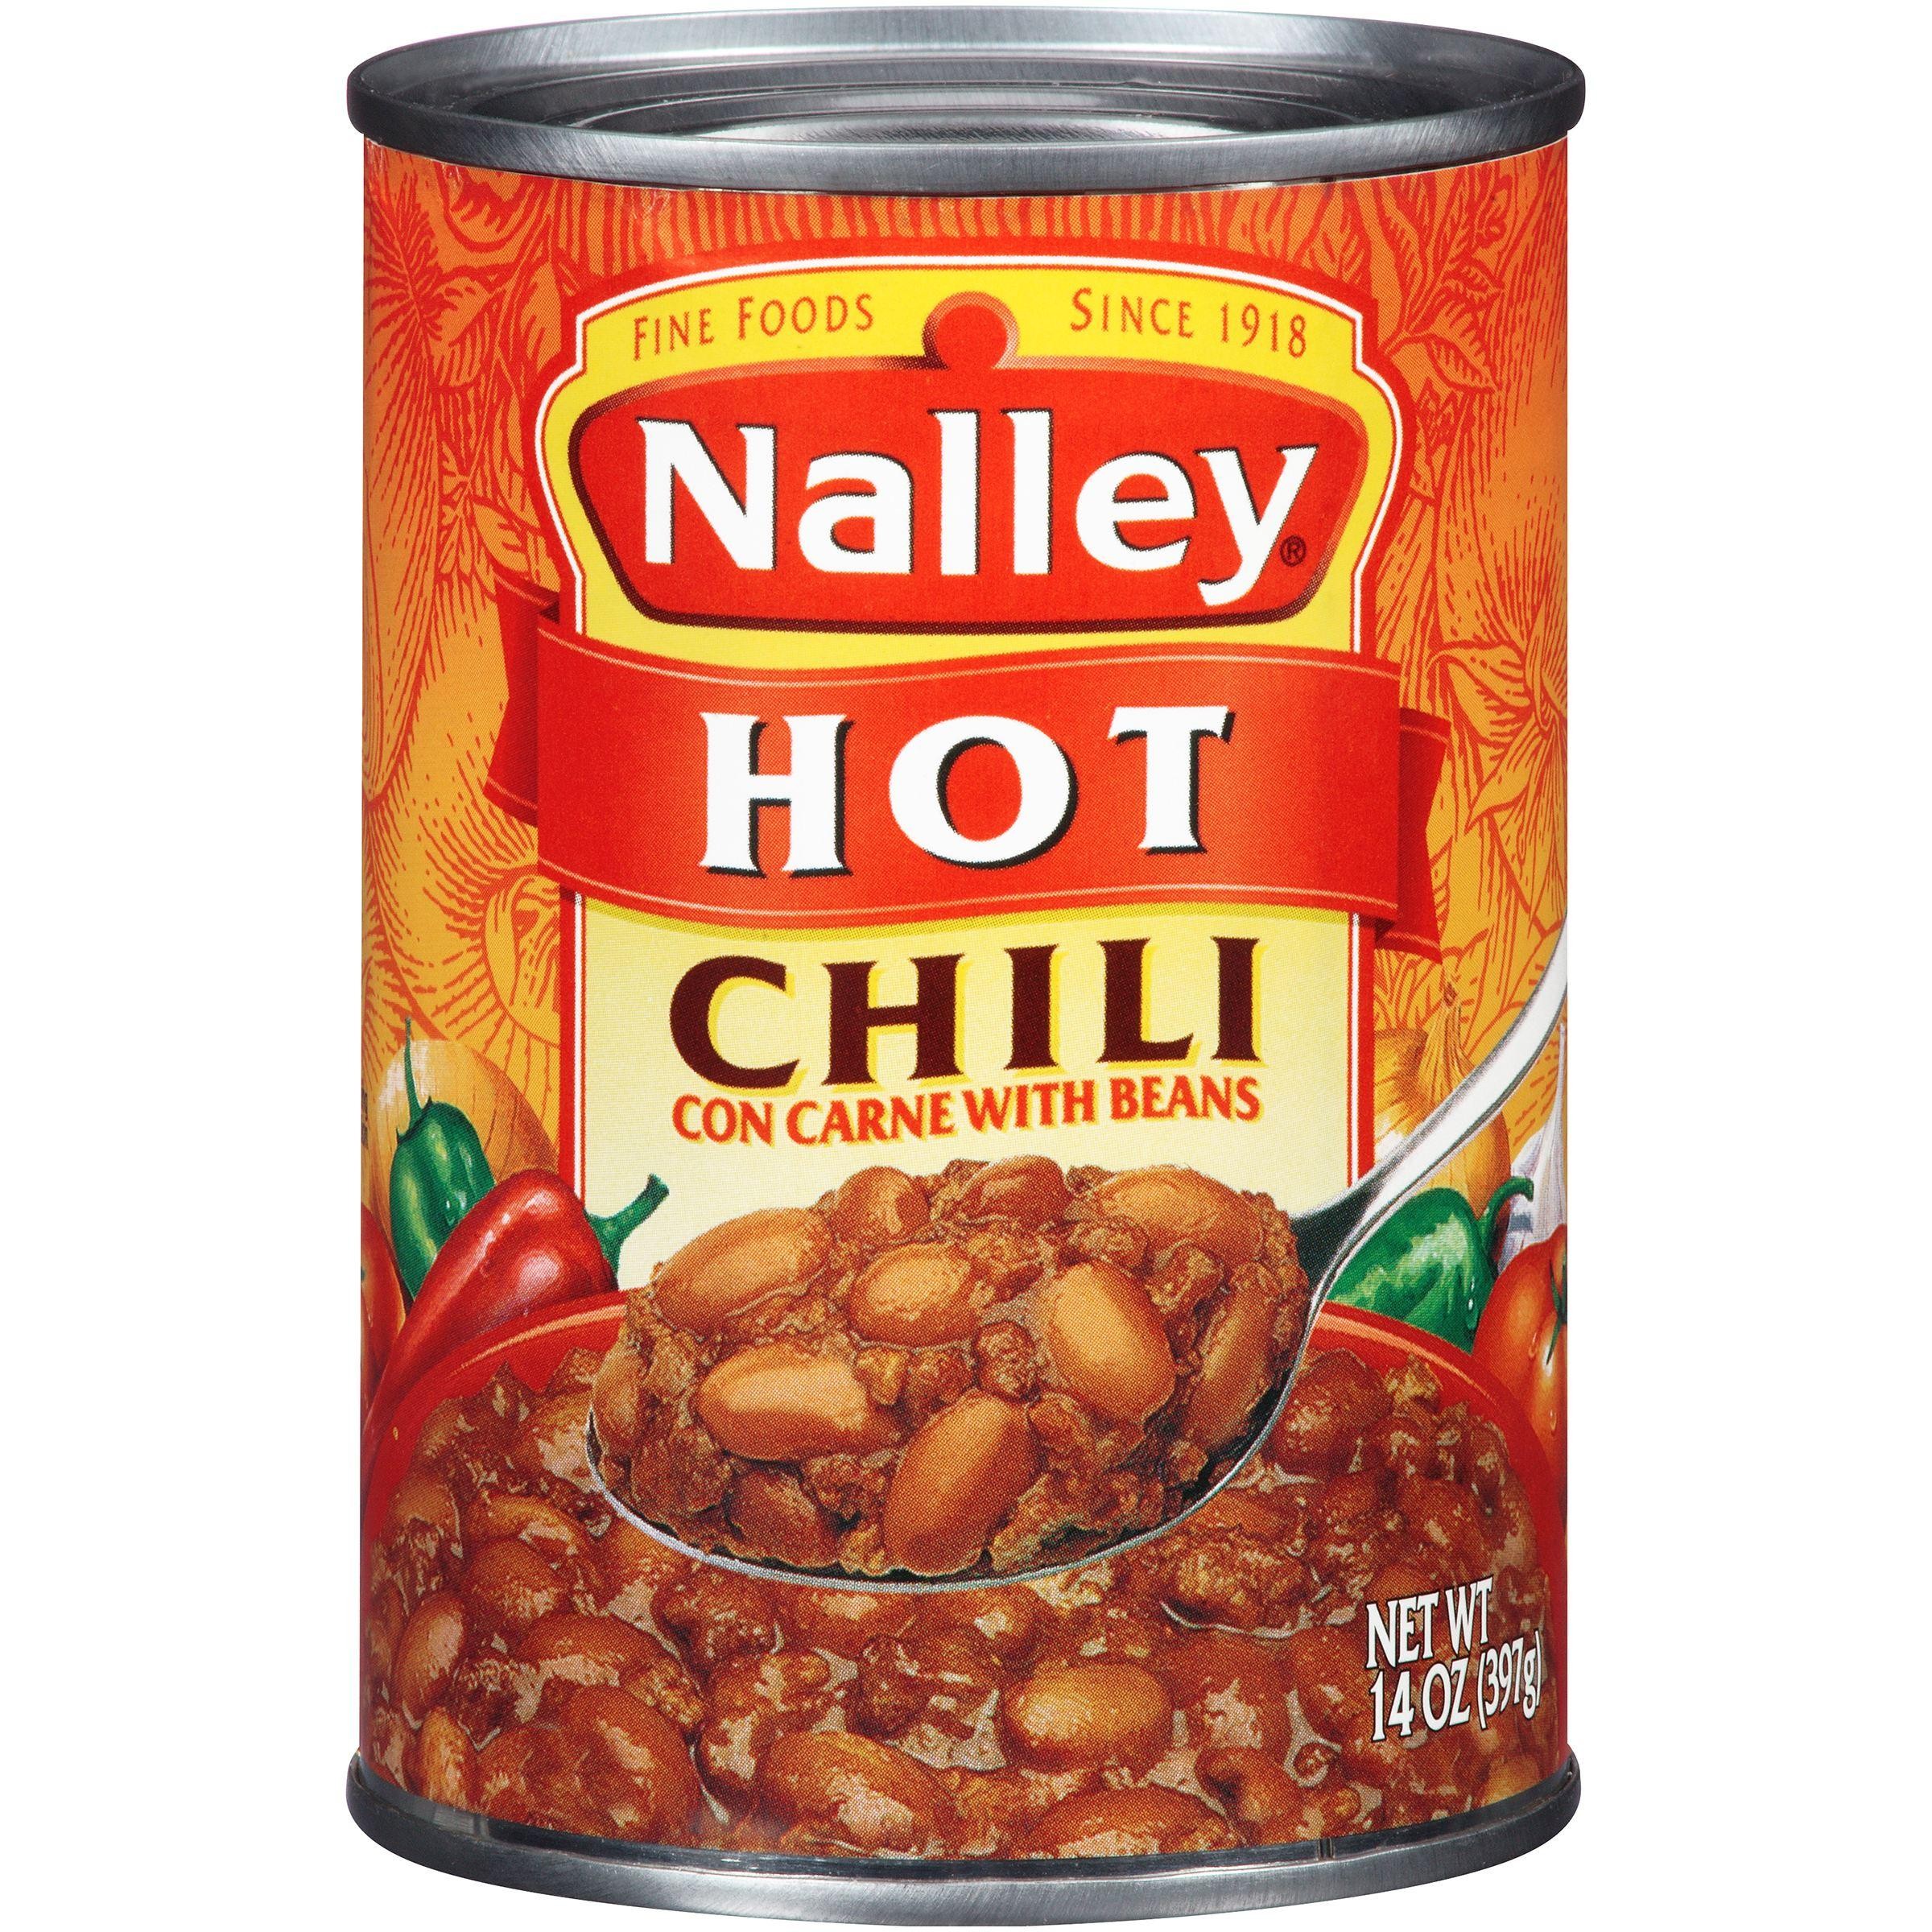 Nalley Hot Chili Con Carne with Beans 15 Oz